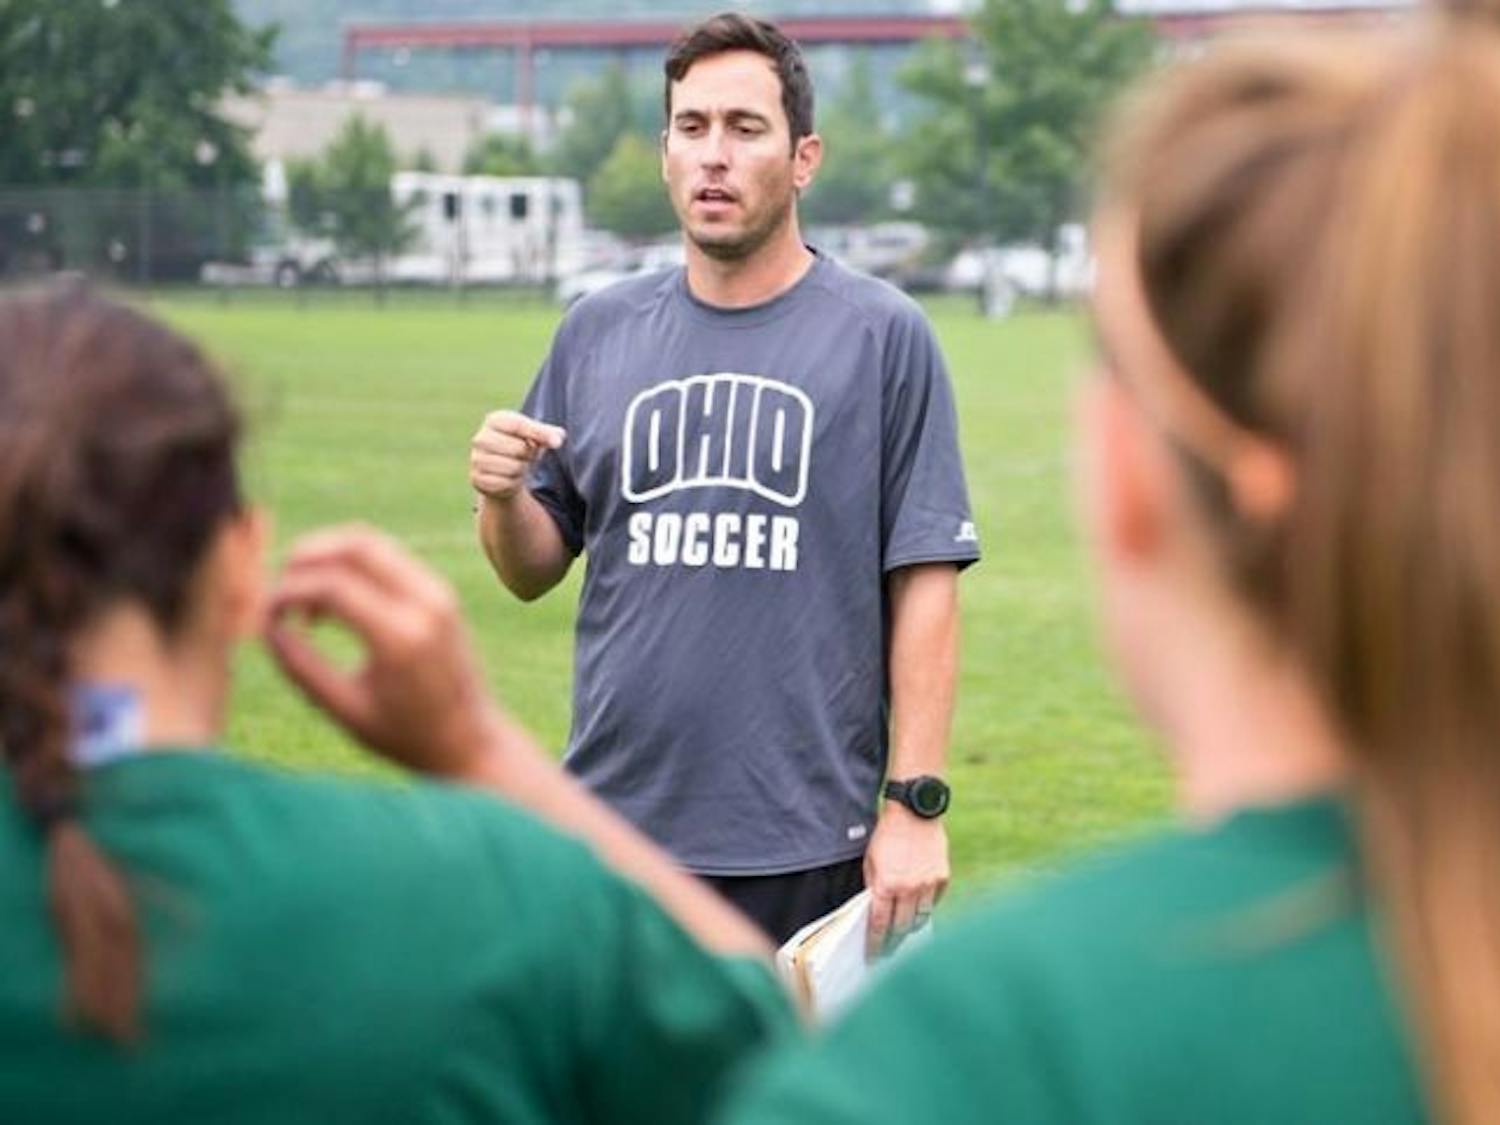 Soccer: Pro experiences guide new coaches  